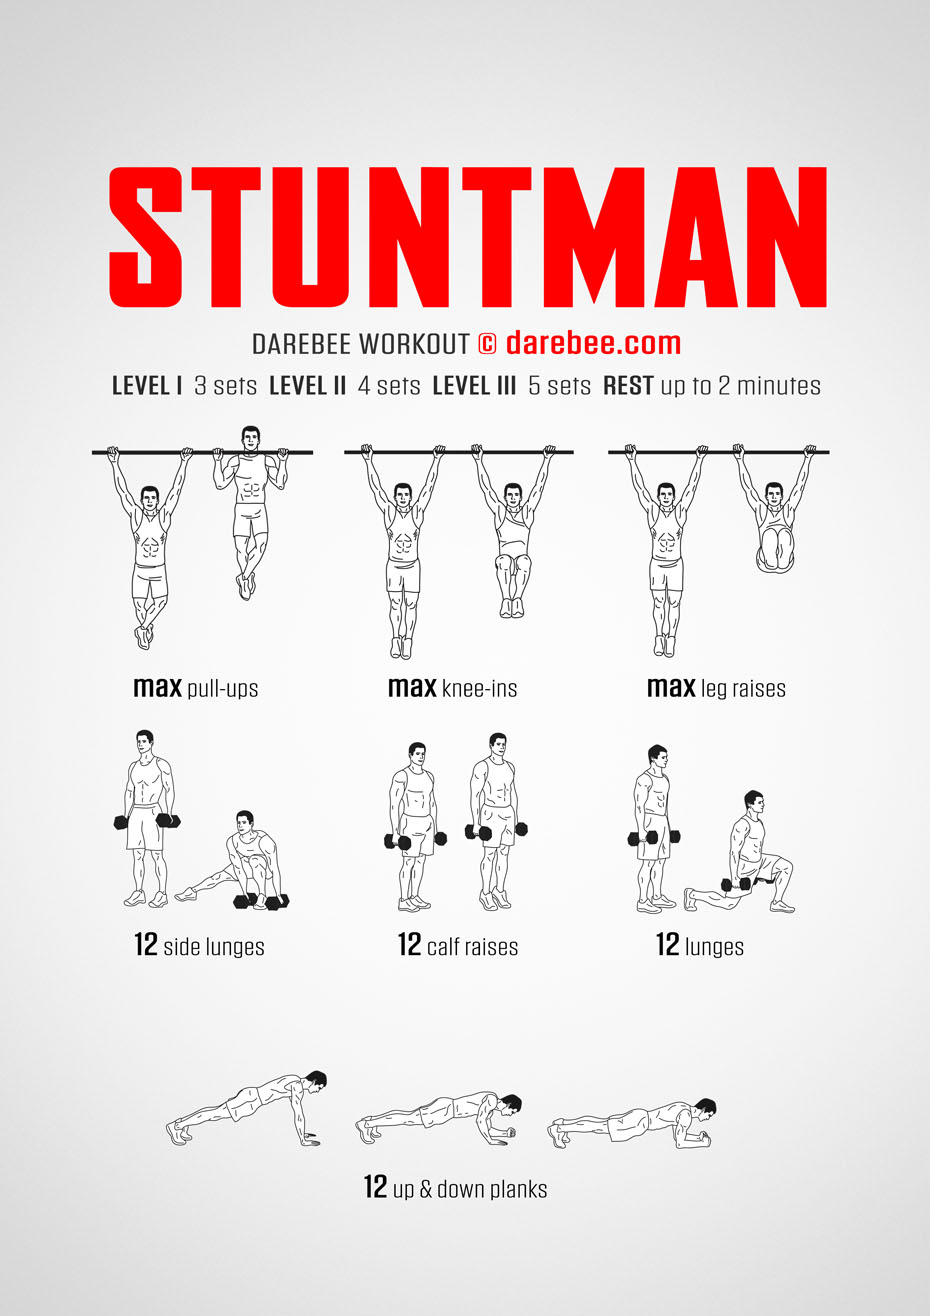 Stuntman is a full-body, explore-the-limits of your ability Darebee home fitness, strength workout.